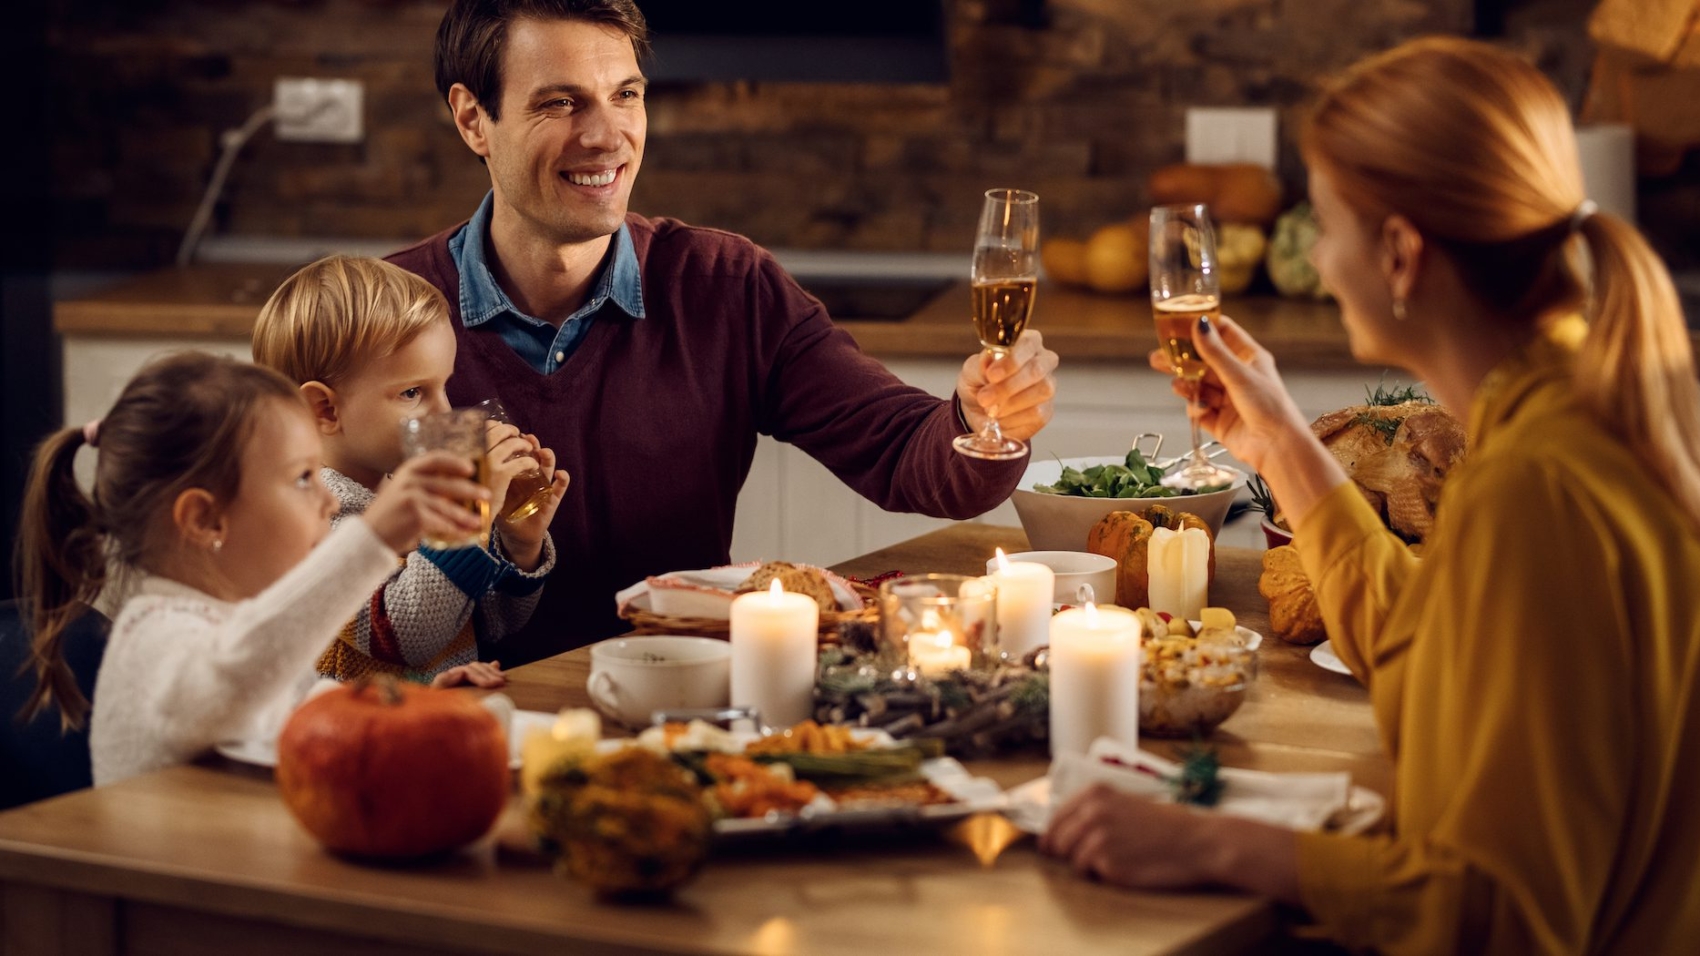 Happy family toasting while having Thanksgiving dinner at dining table. Focus is on father.